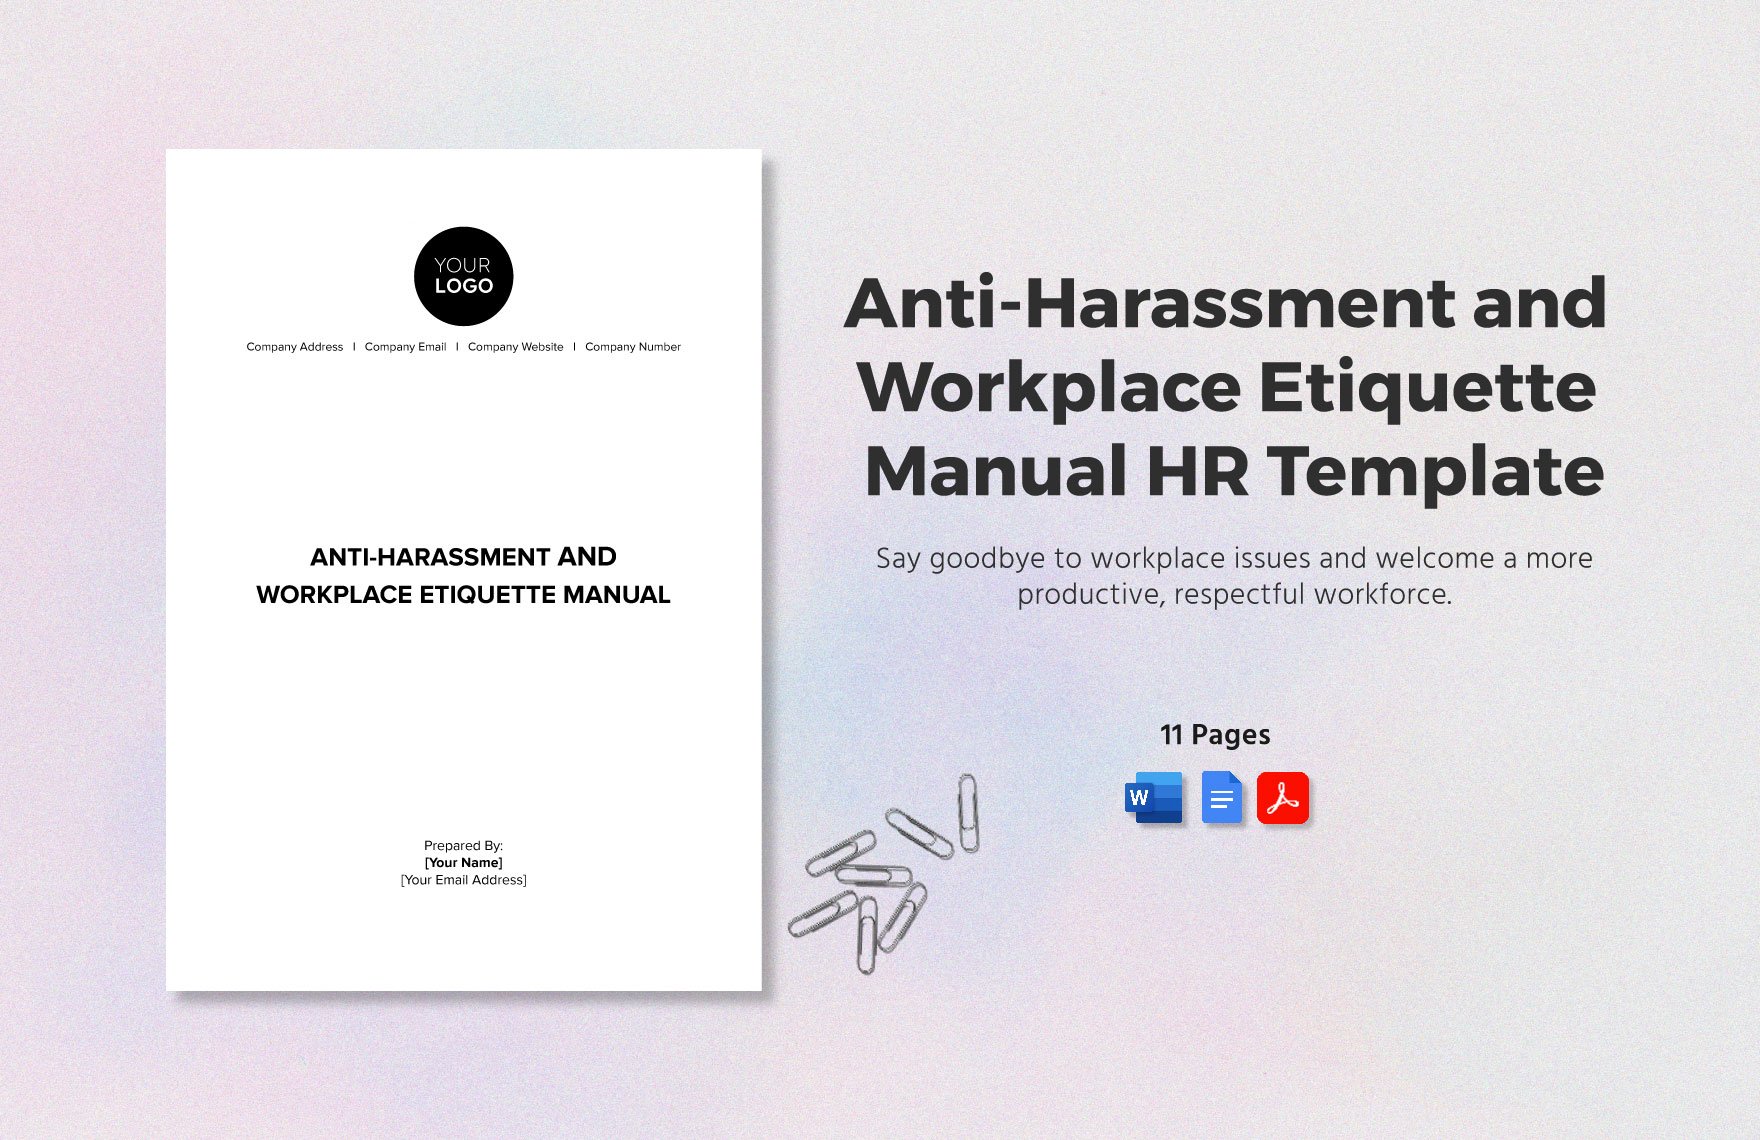 Anti-Harassment and Workplace Etiquette Manual HR Template in Word, Google Docs, PDF